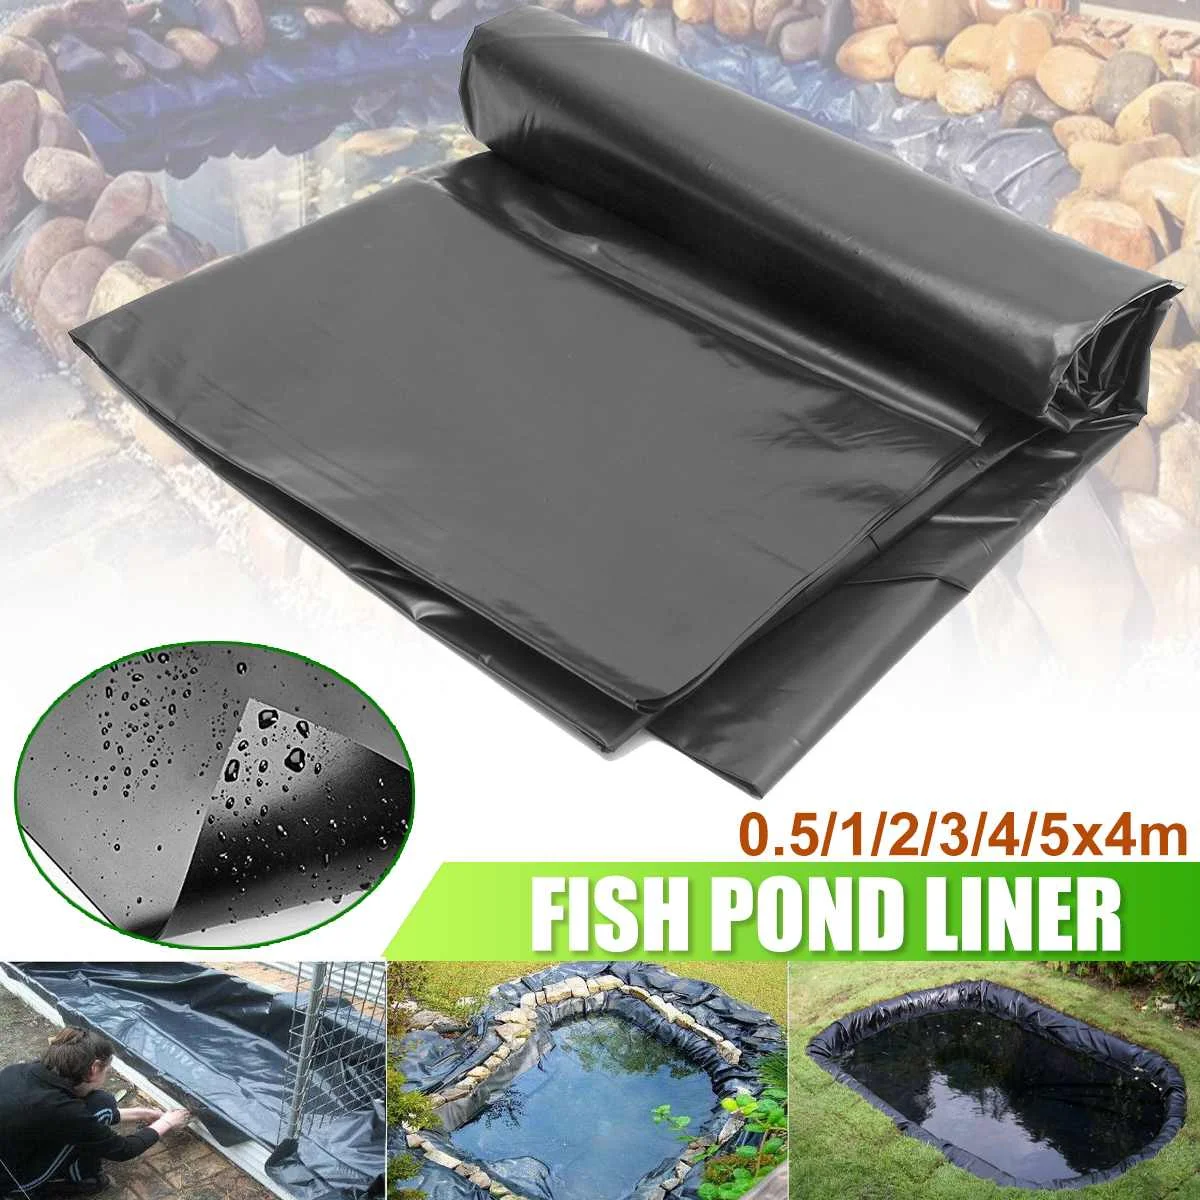 

2x2m/3x3m/4x4m HDPE Fish Pond Liner Garden Pond Landscaping Pool Reinforced Thick Heavy Duty Waterproof Membrane Pond Liners